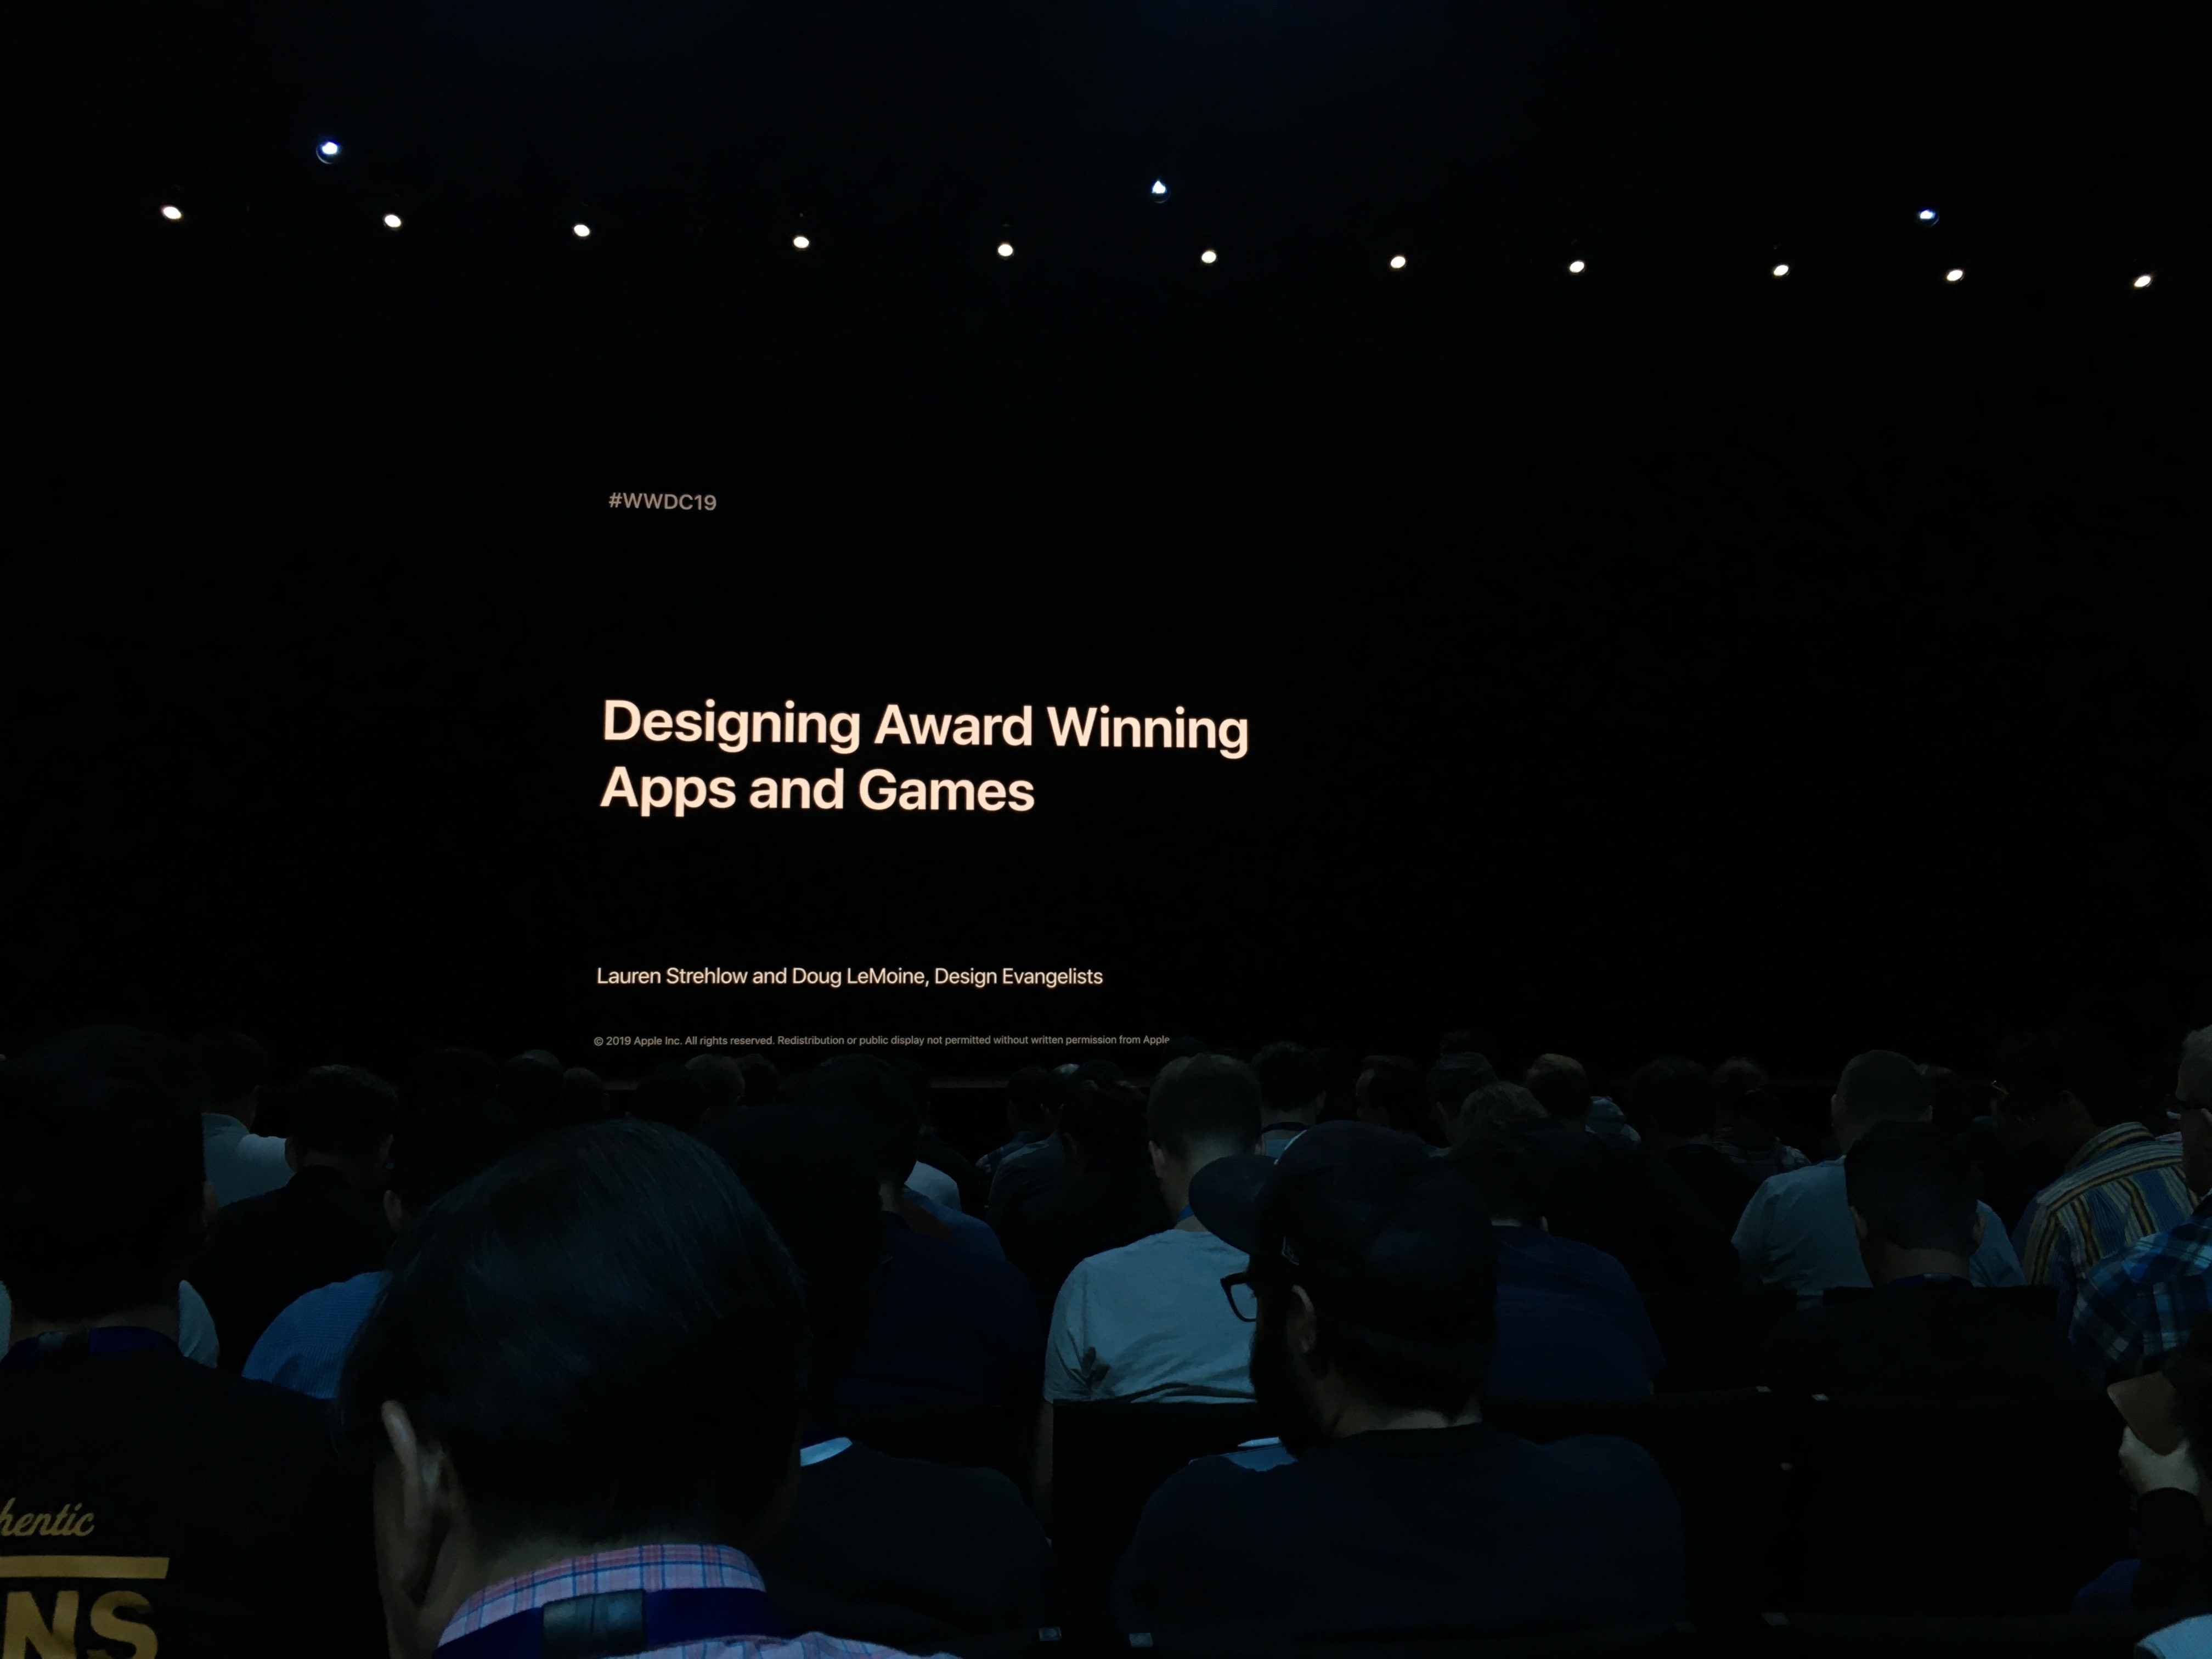 WWDC Session called Designing Award Winning Apps and Games